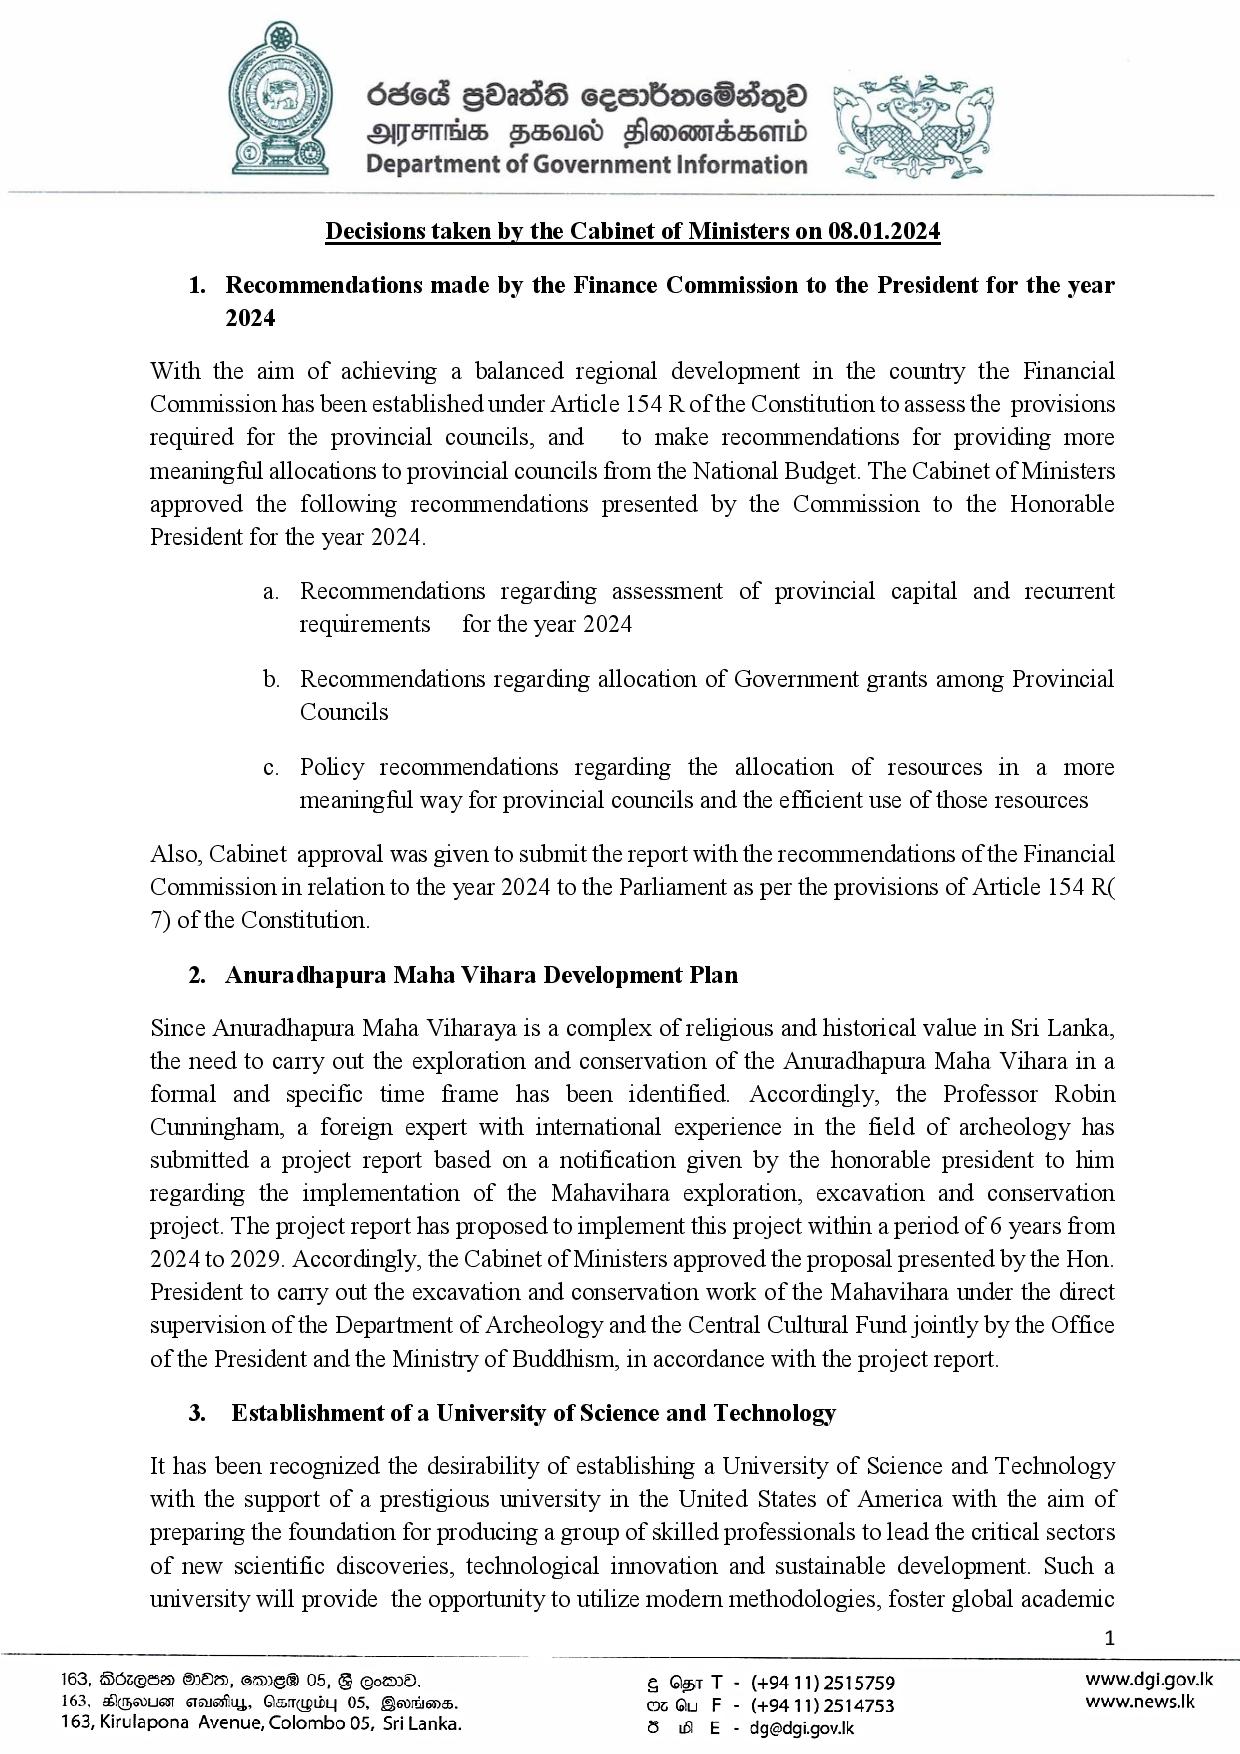 Cabinet Decisions on 08.01.2024 Eng page 001